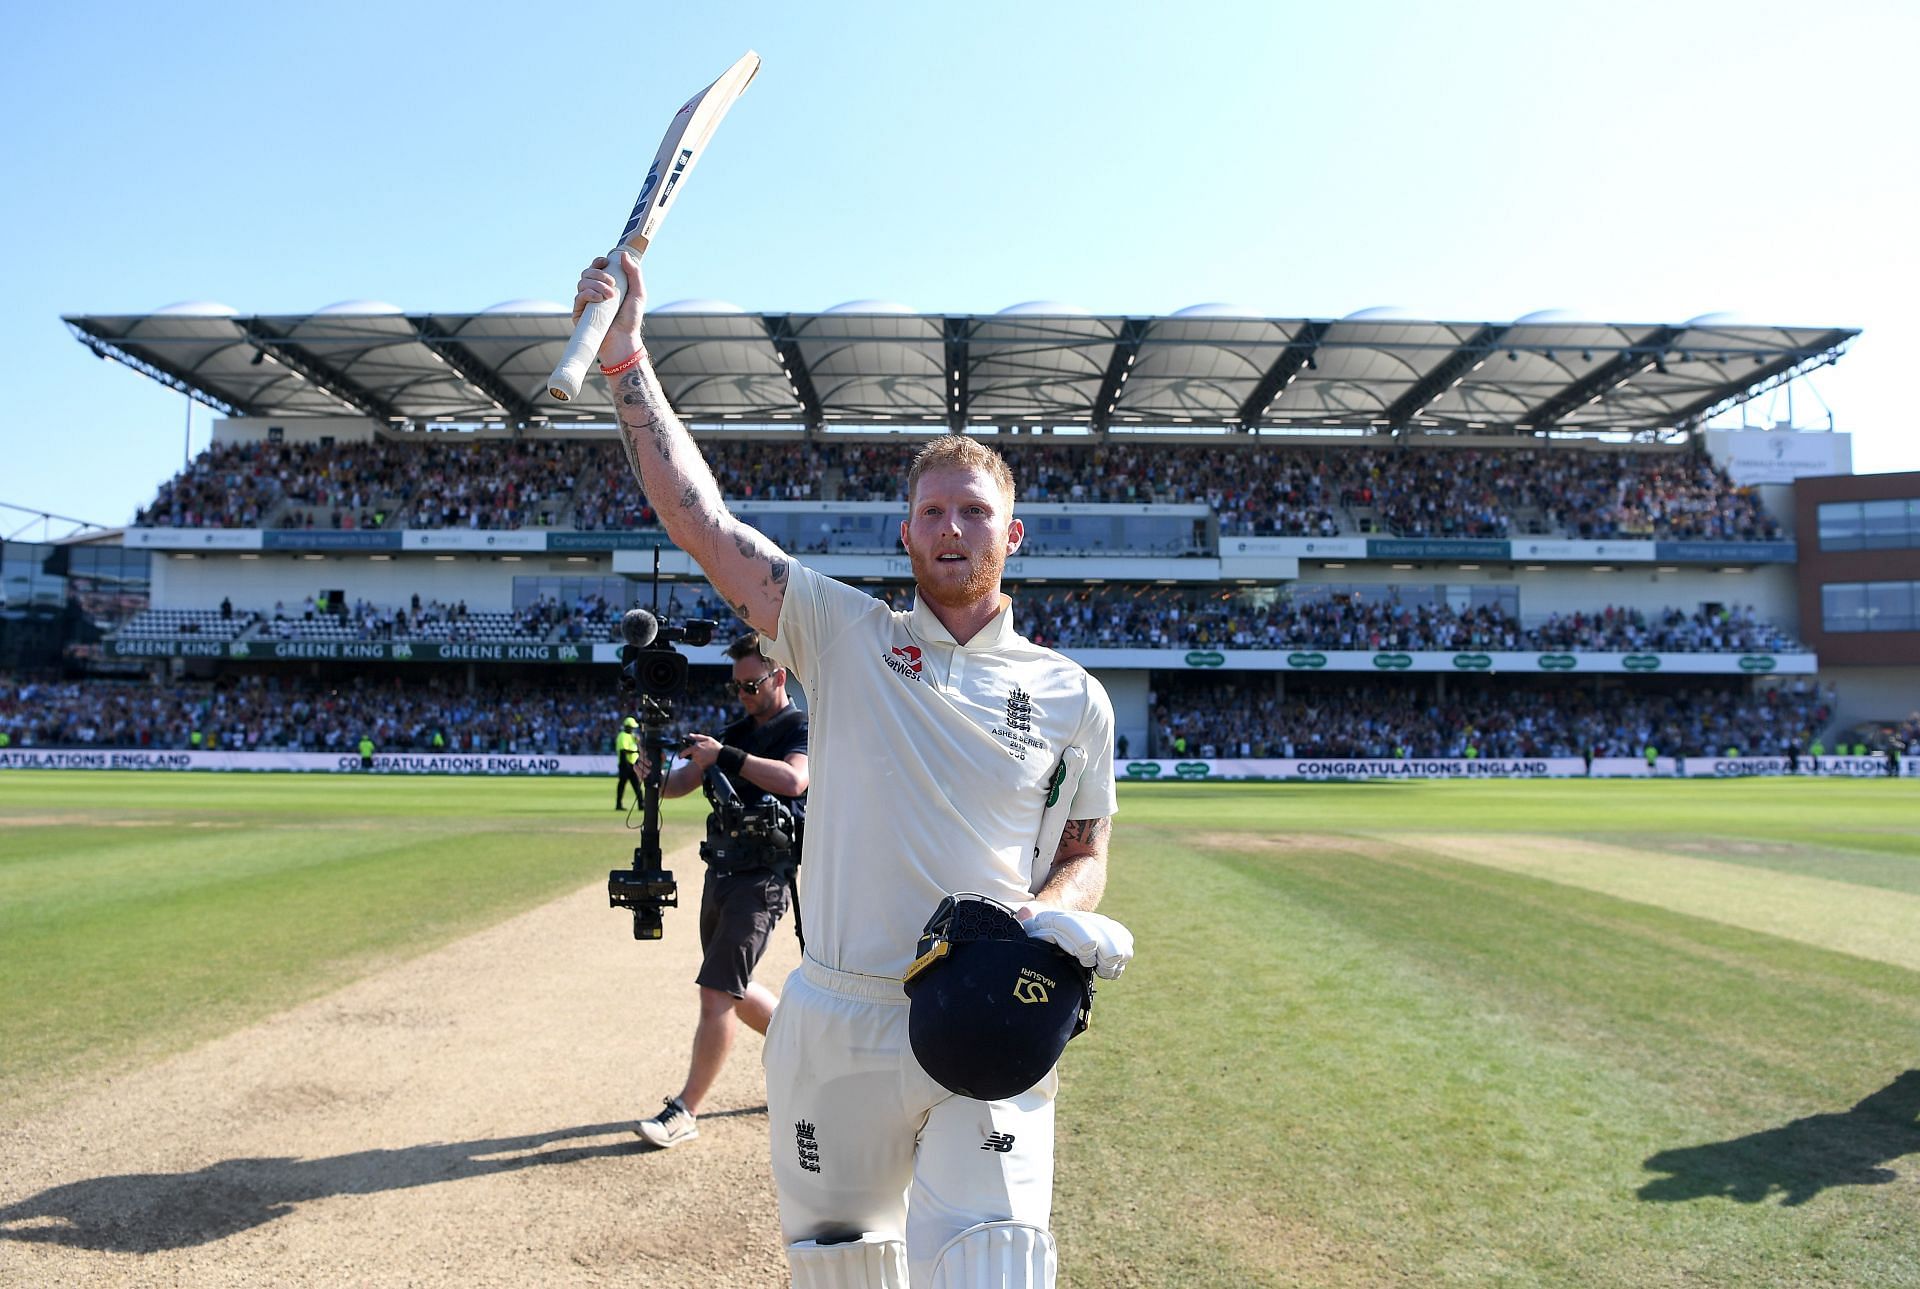 Ben Stokes will likely go under the hammer at IPL Auction 2022